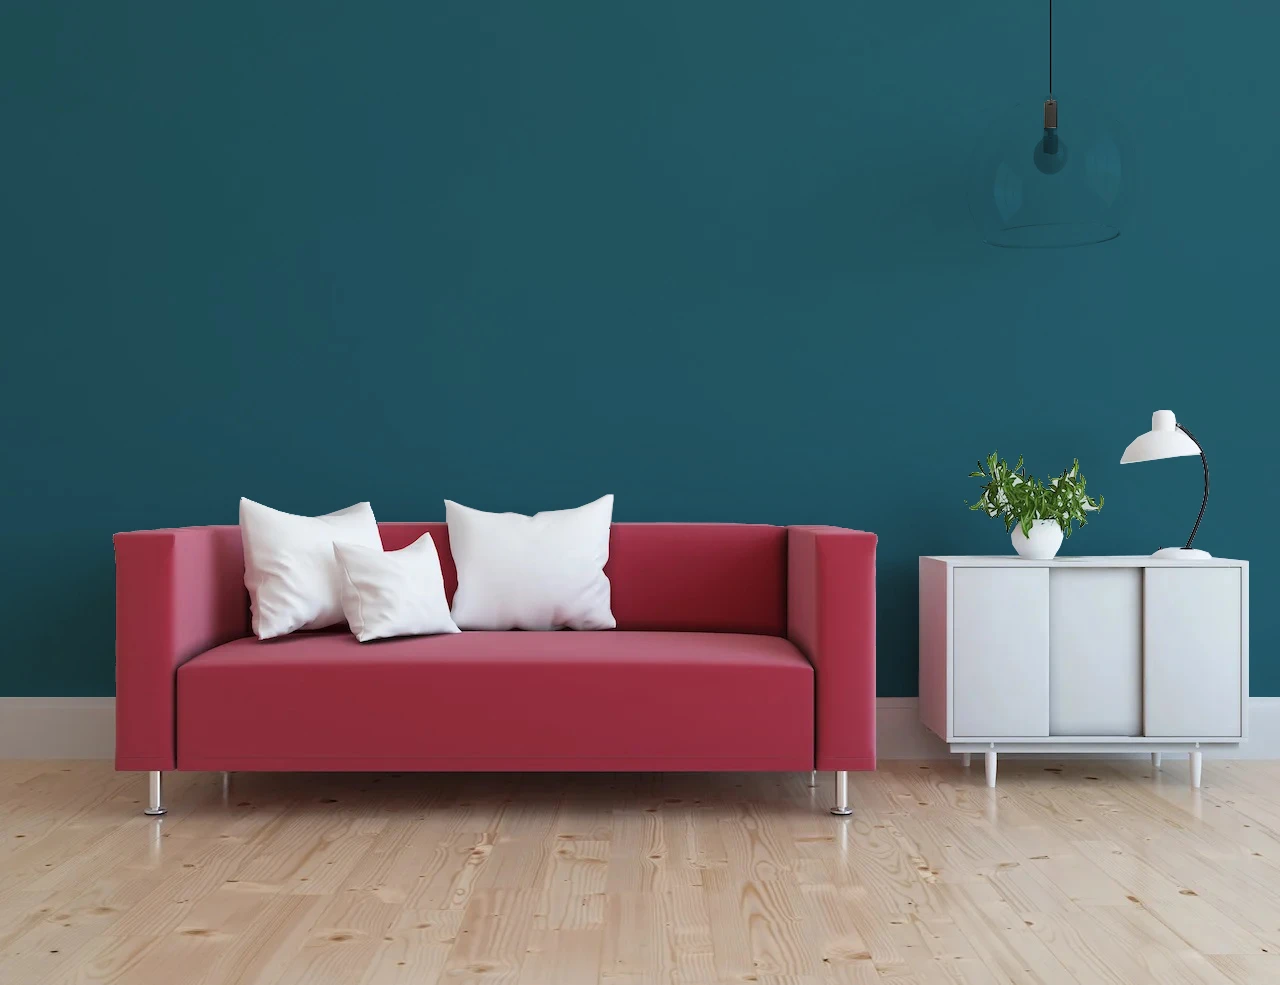 cobalt blue walls with red couch